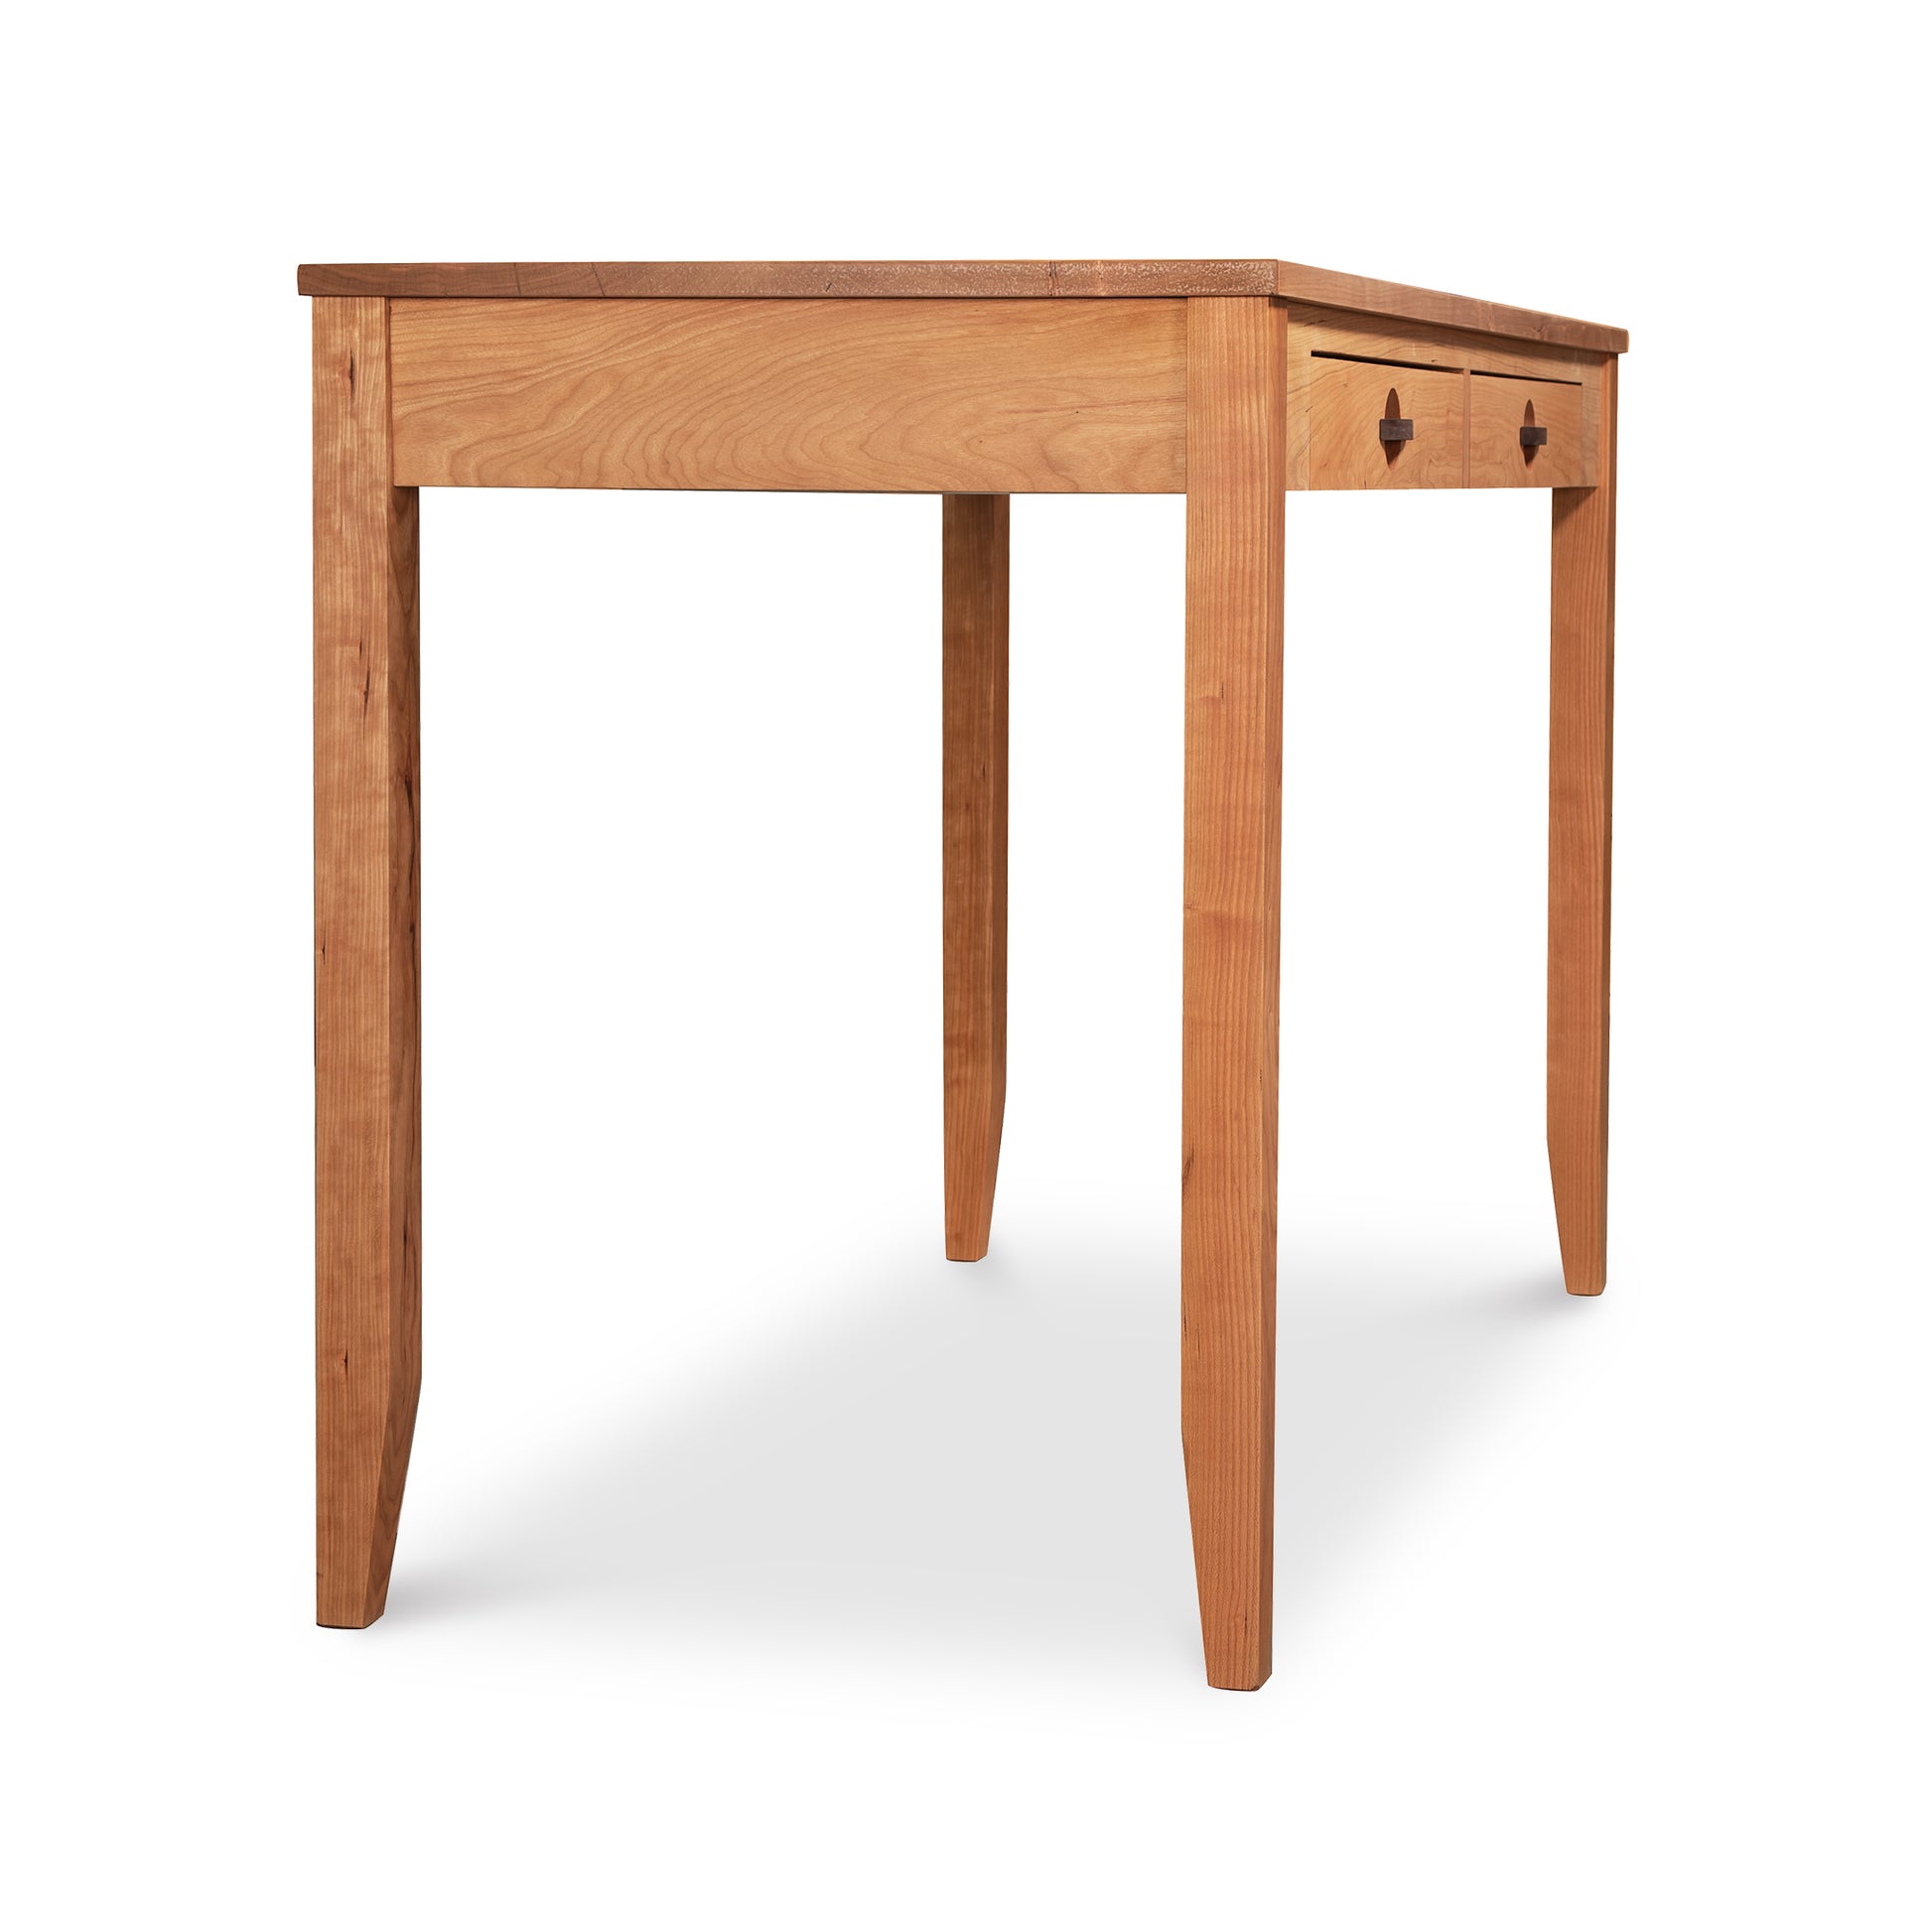 A Ryegate Writing Desk from Maple Corner Woodworks with solid wood construction and a drawer on top.